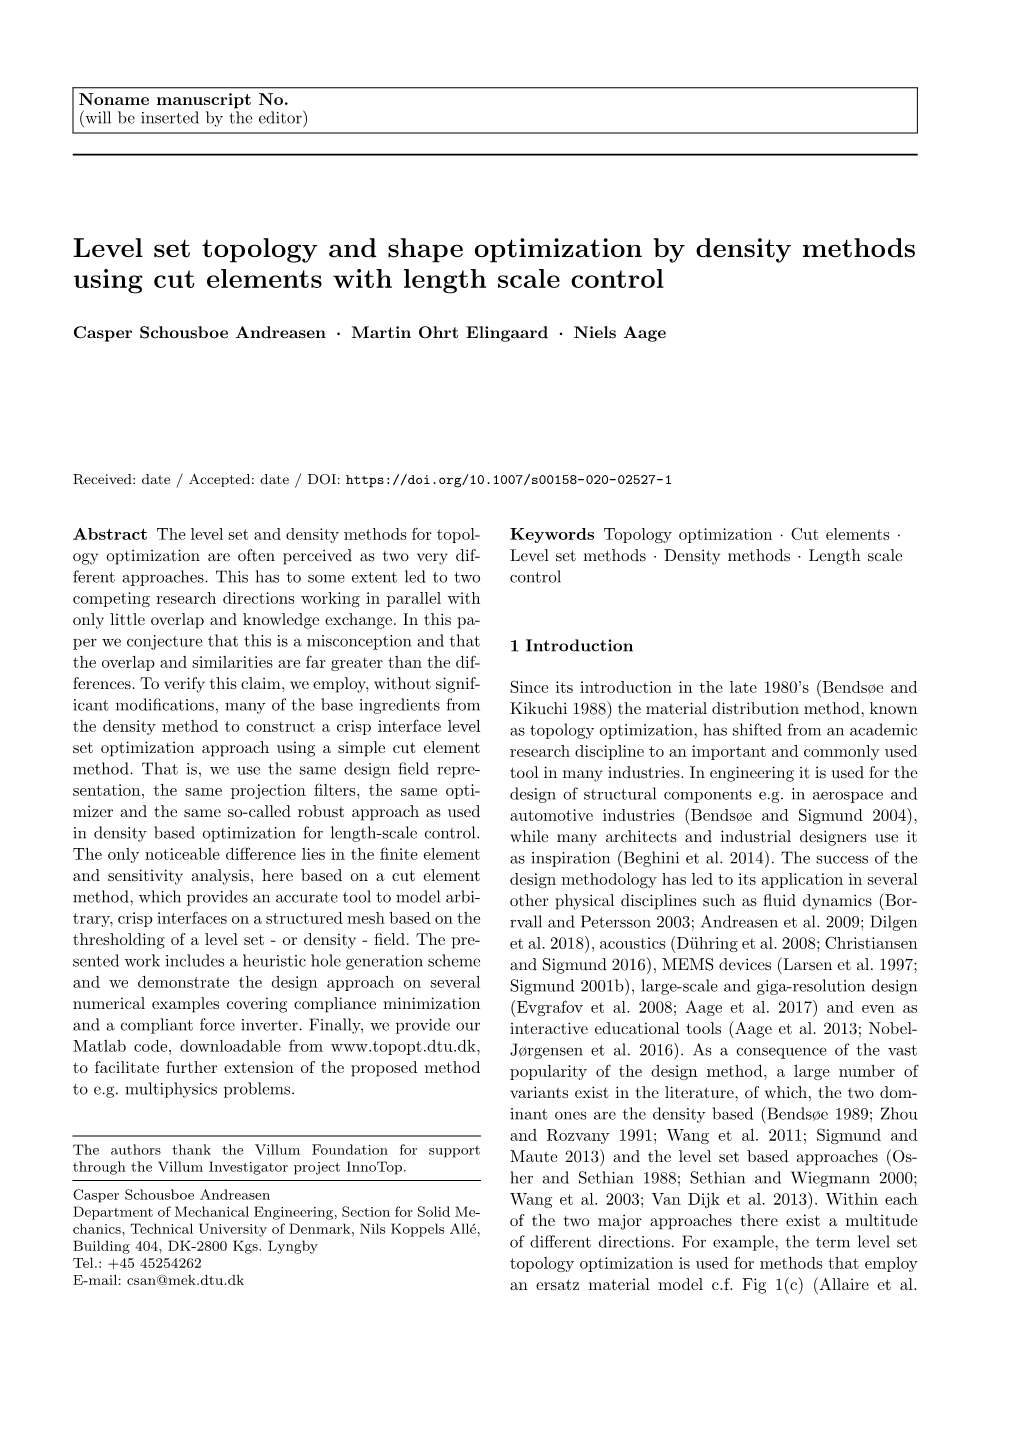 Level Set Topology and Shape Optimization by Density Methods Using Cut Elements with Length Scale Control